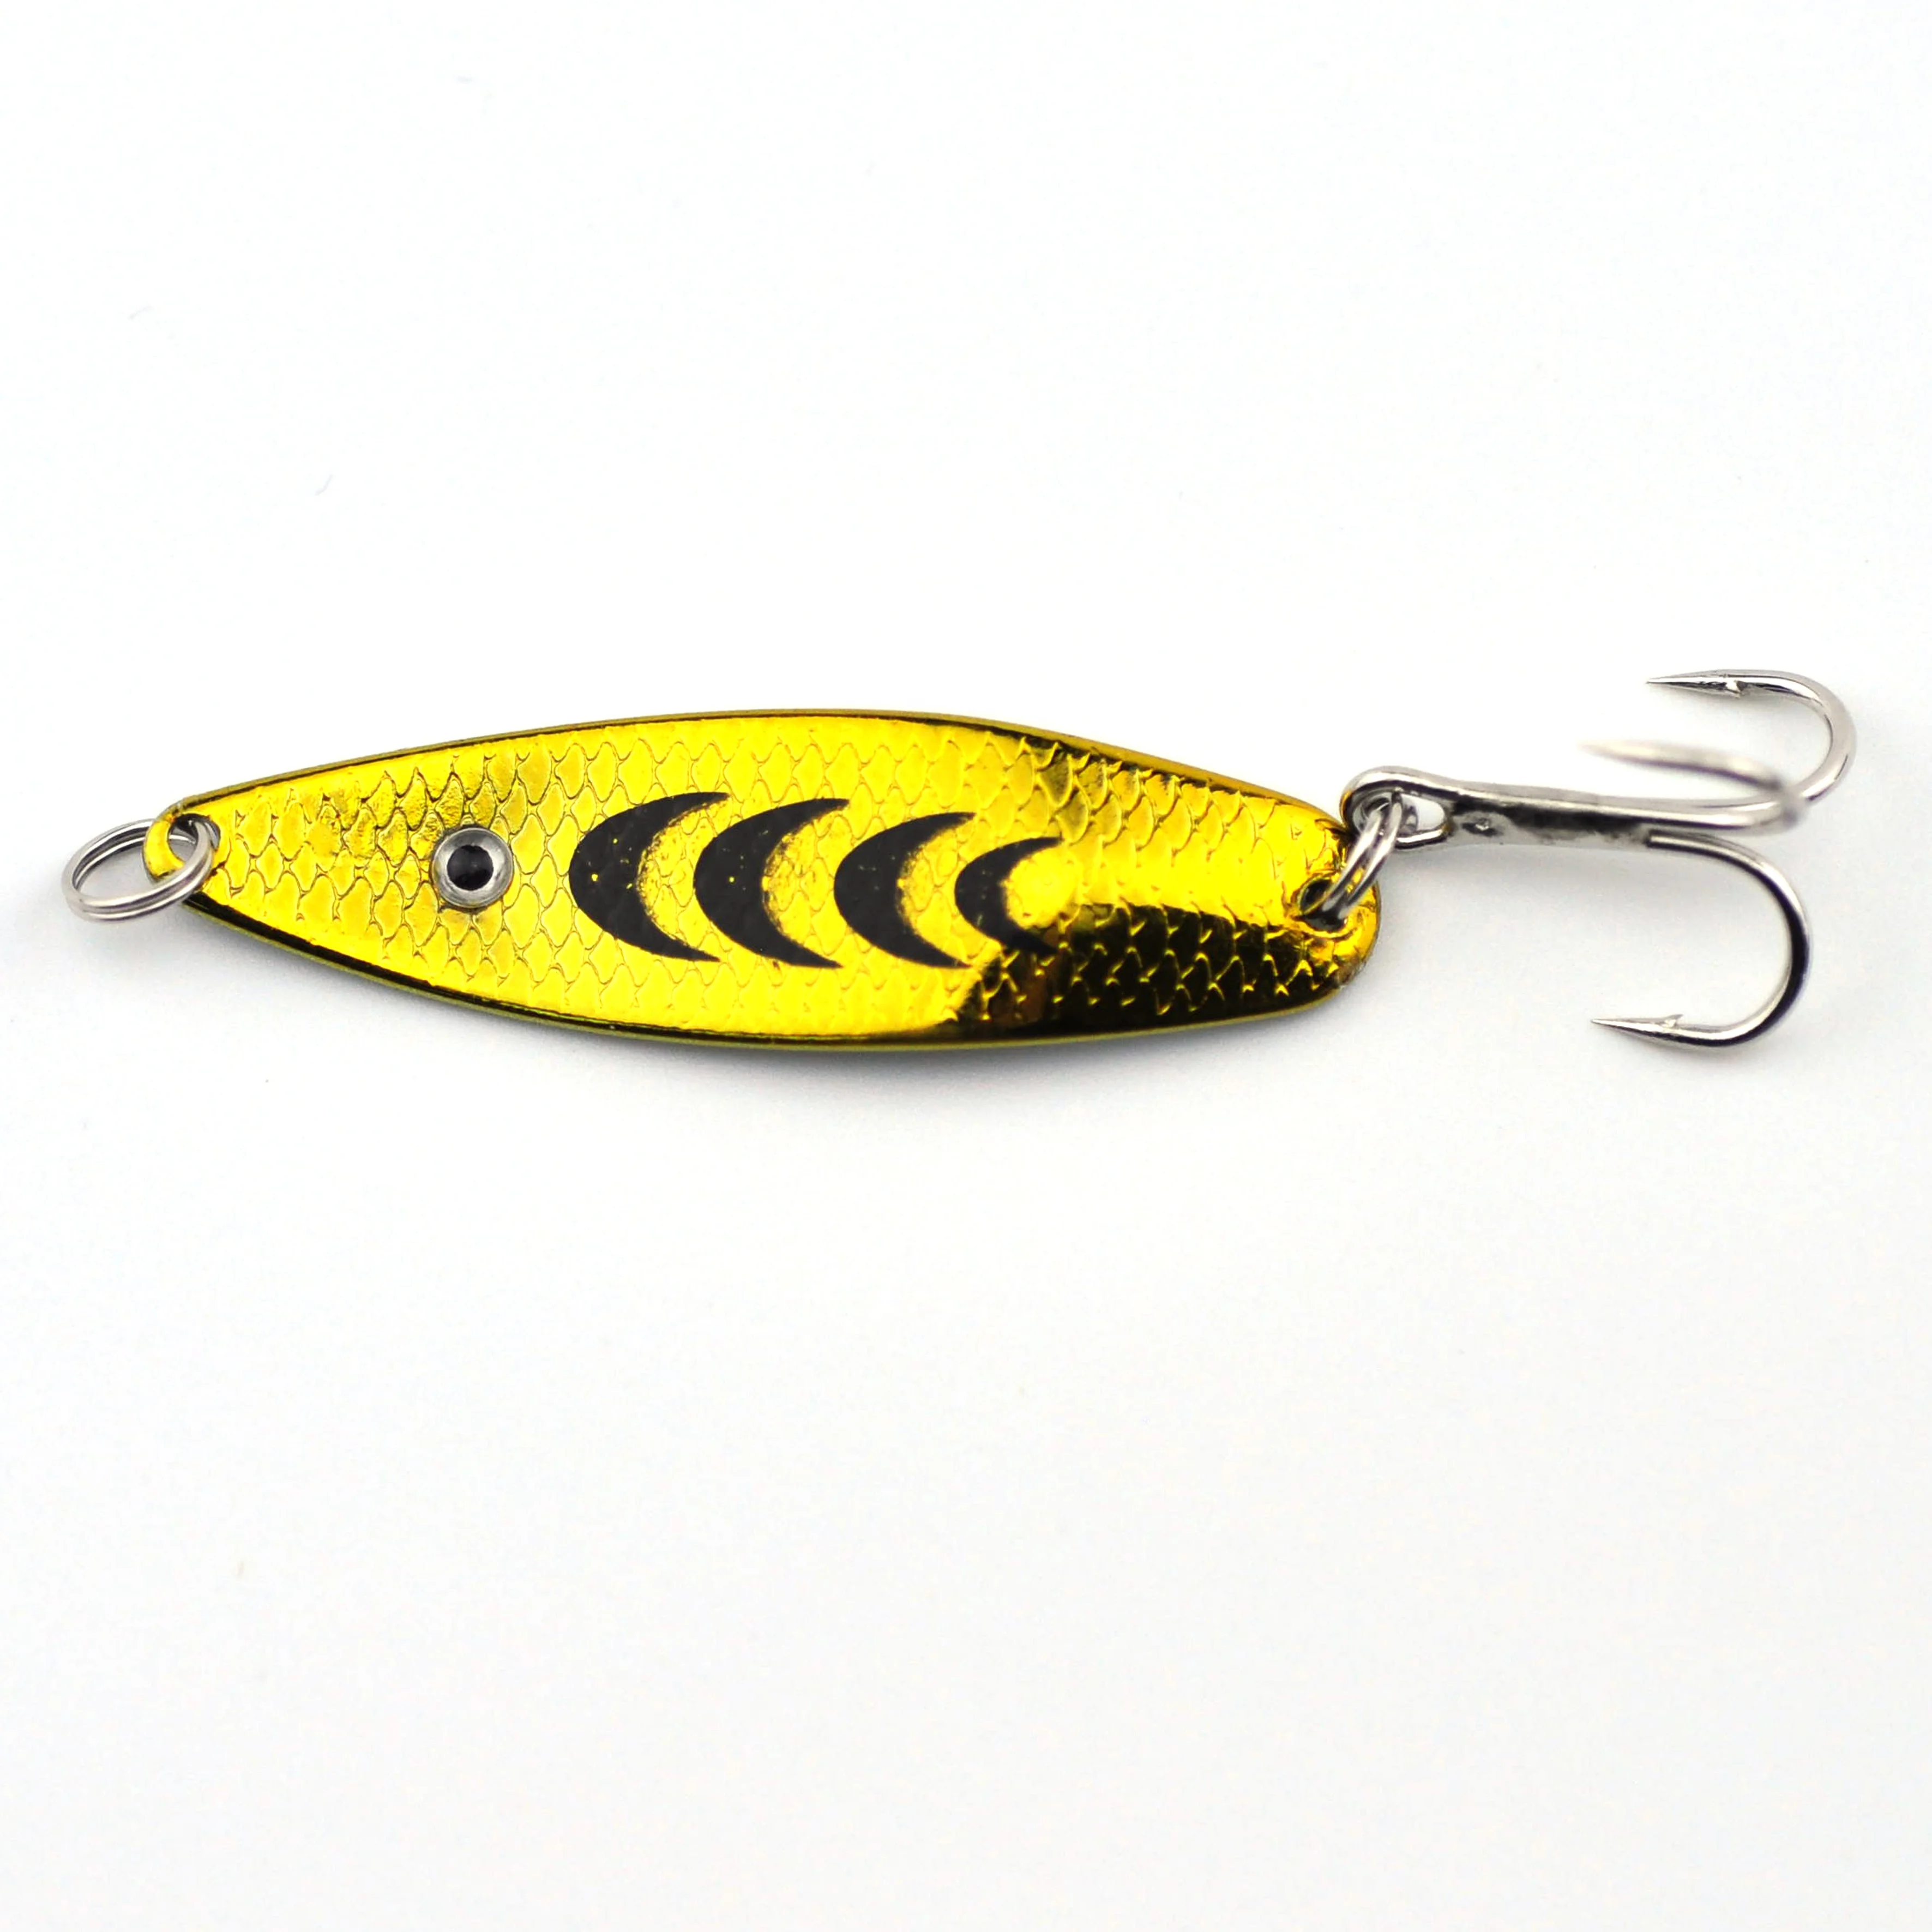 

Oteena 5cm/6.8g Metal Fishing Spoon Lure with 6# Treble Hook #Hard Spinner Fishing Spoon Lure #Artificial Baits